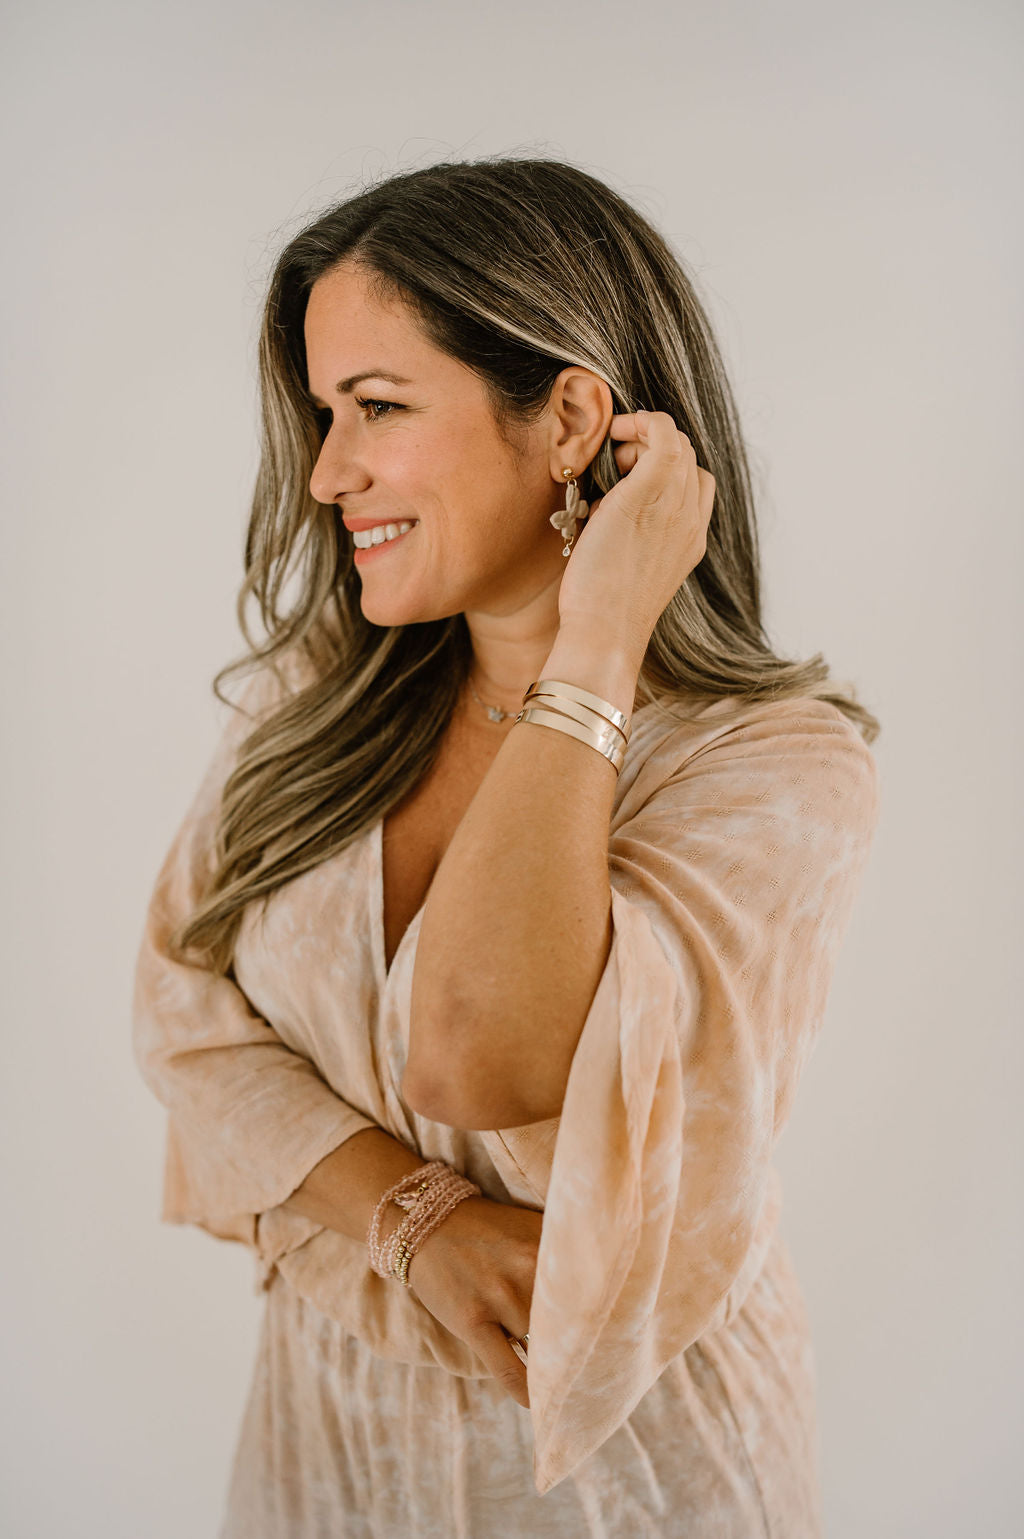 Natalie from Growing the Pizarro's modeling a trio of gold filled adjustable bracelets.